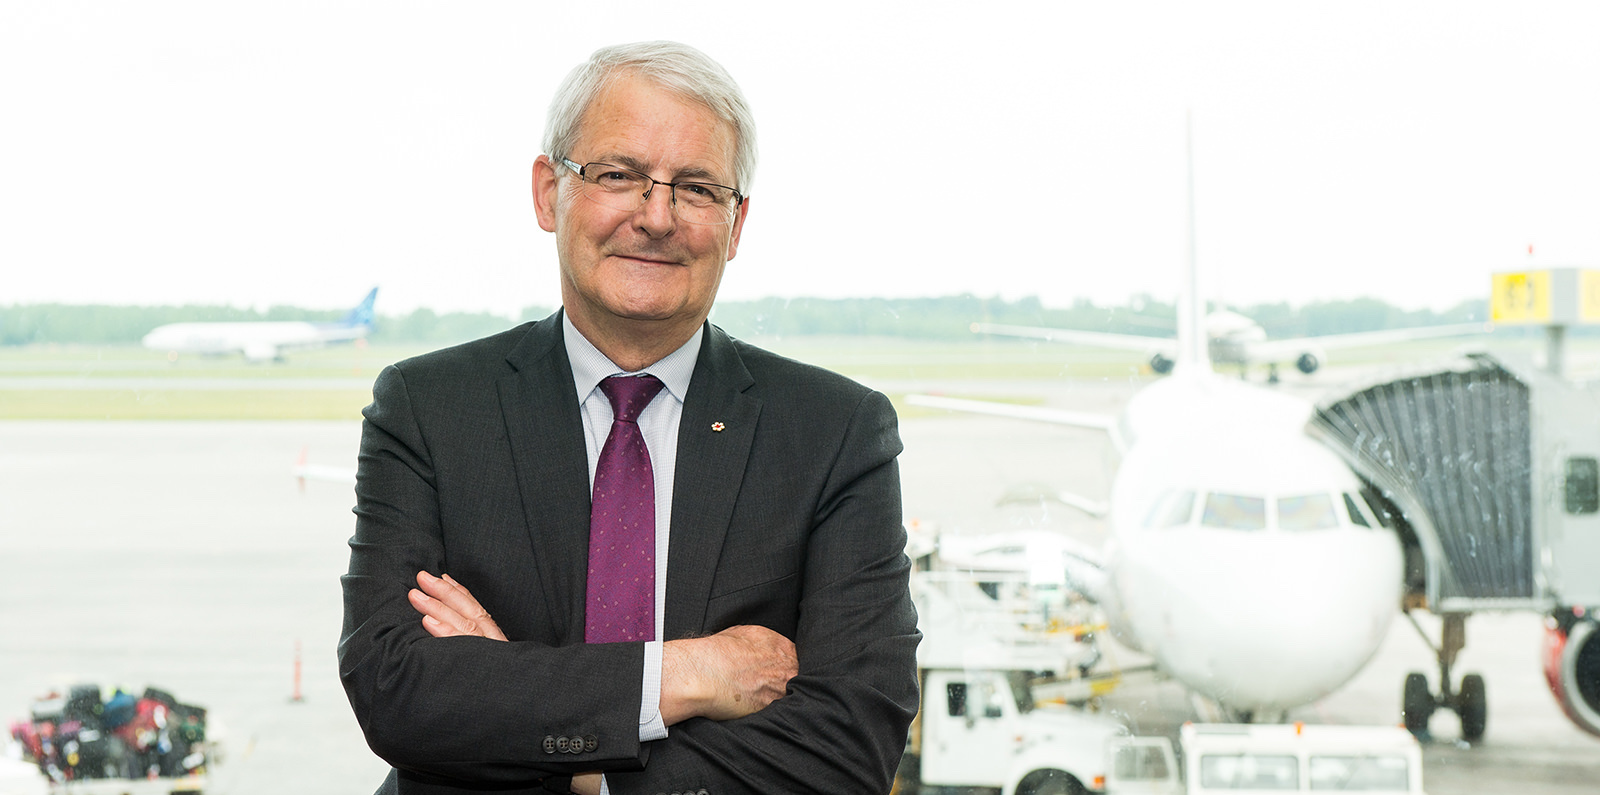 Drone hits passenger plane above Quebec City airport in Canada. The Honourable Marc Garneau, federal Minister of Transport (photo: Alain Denis)